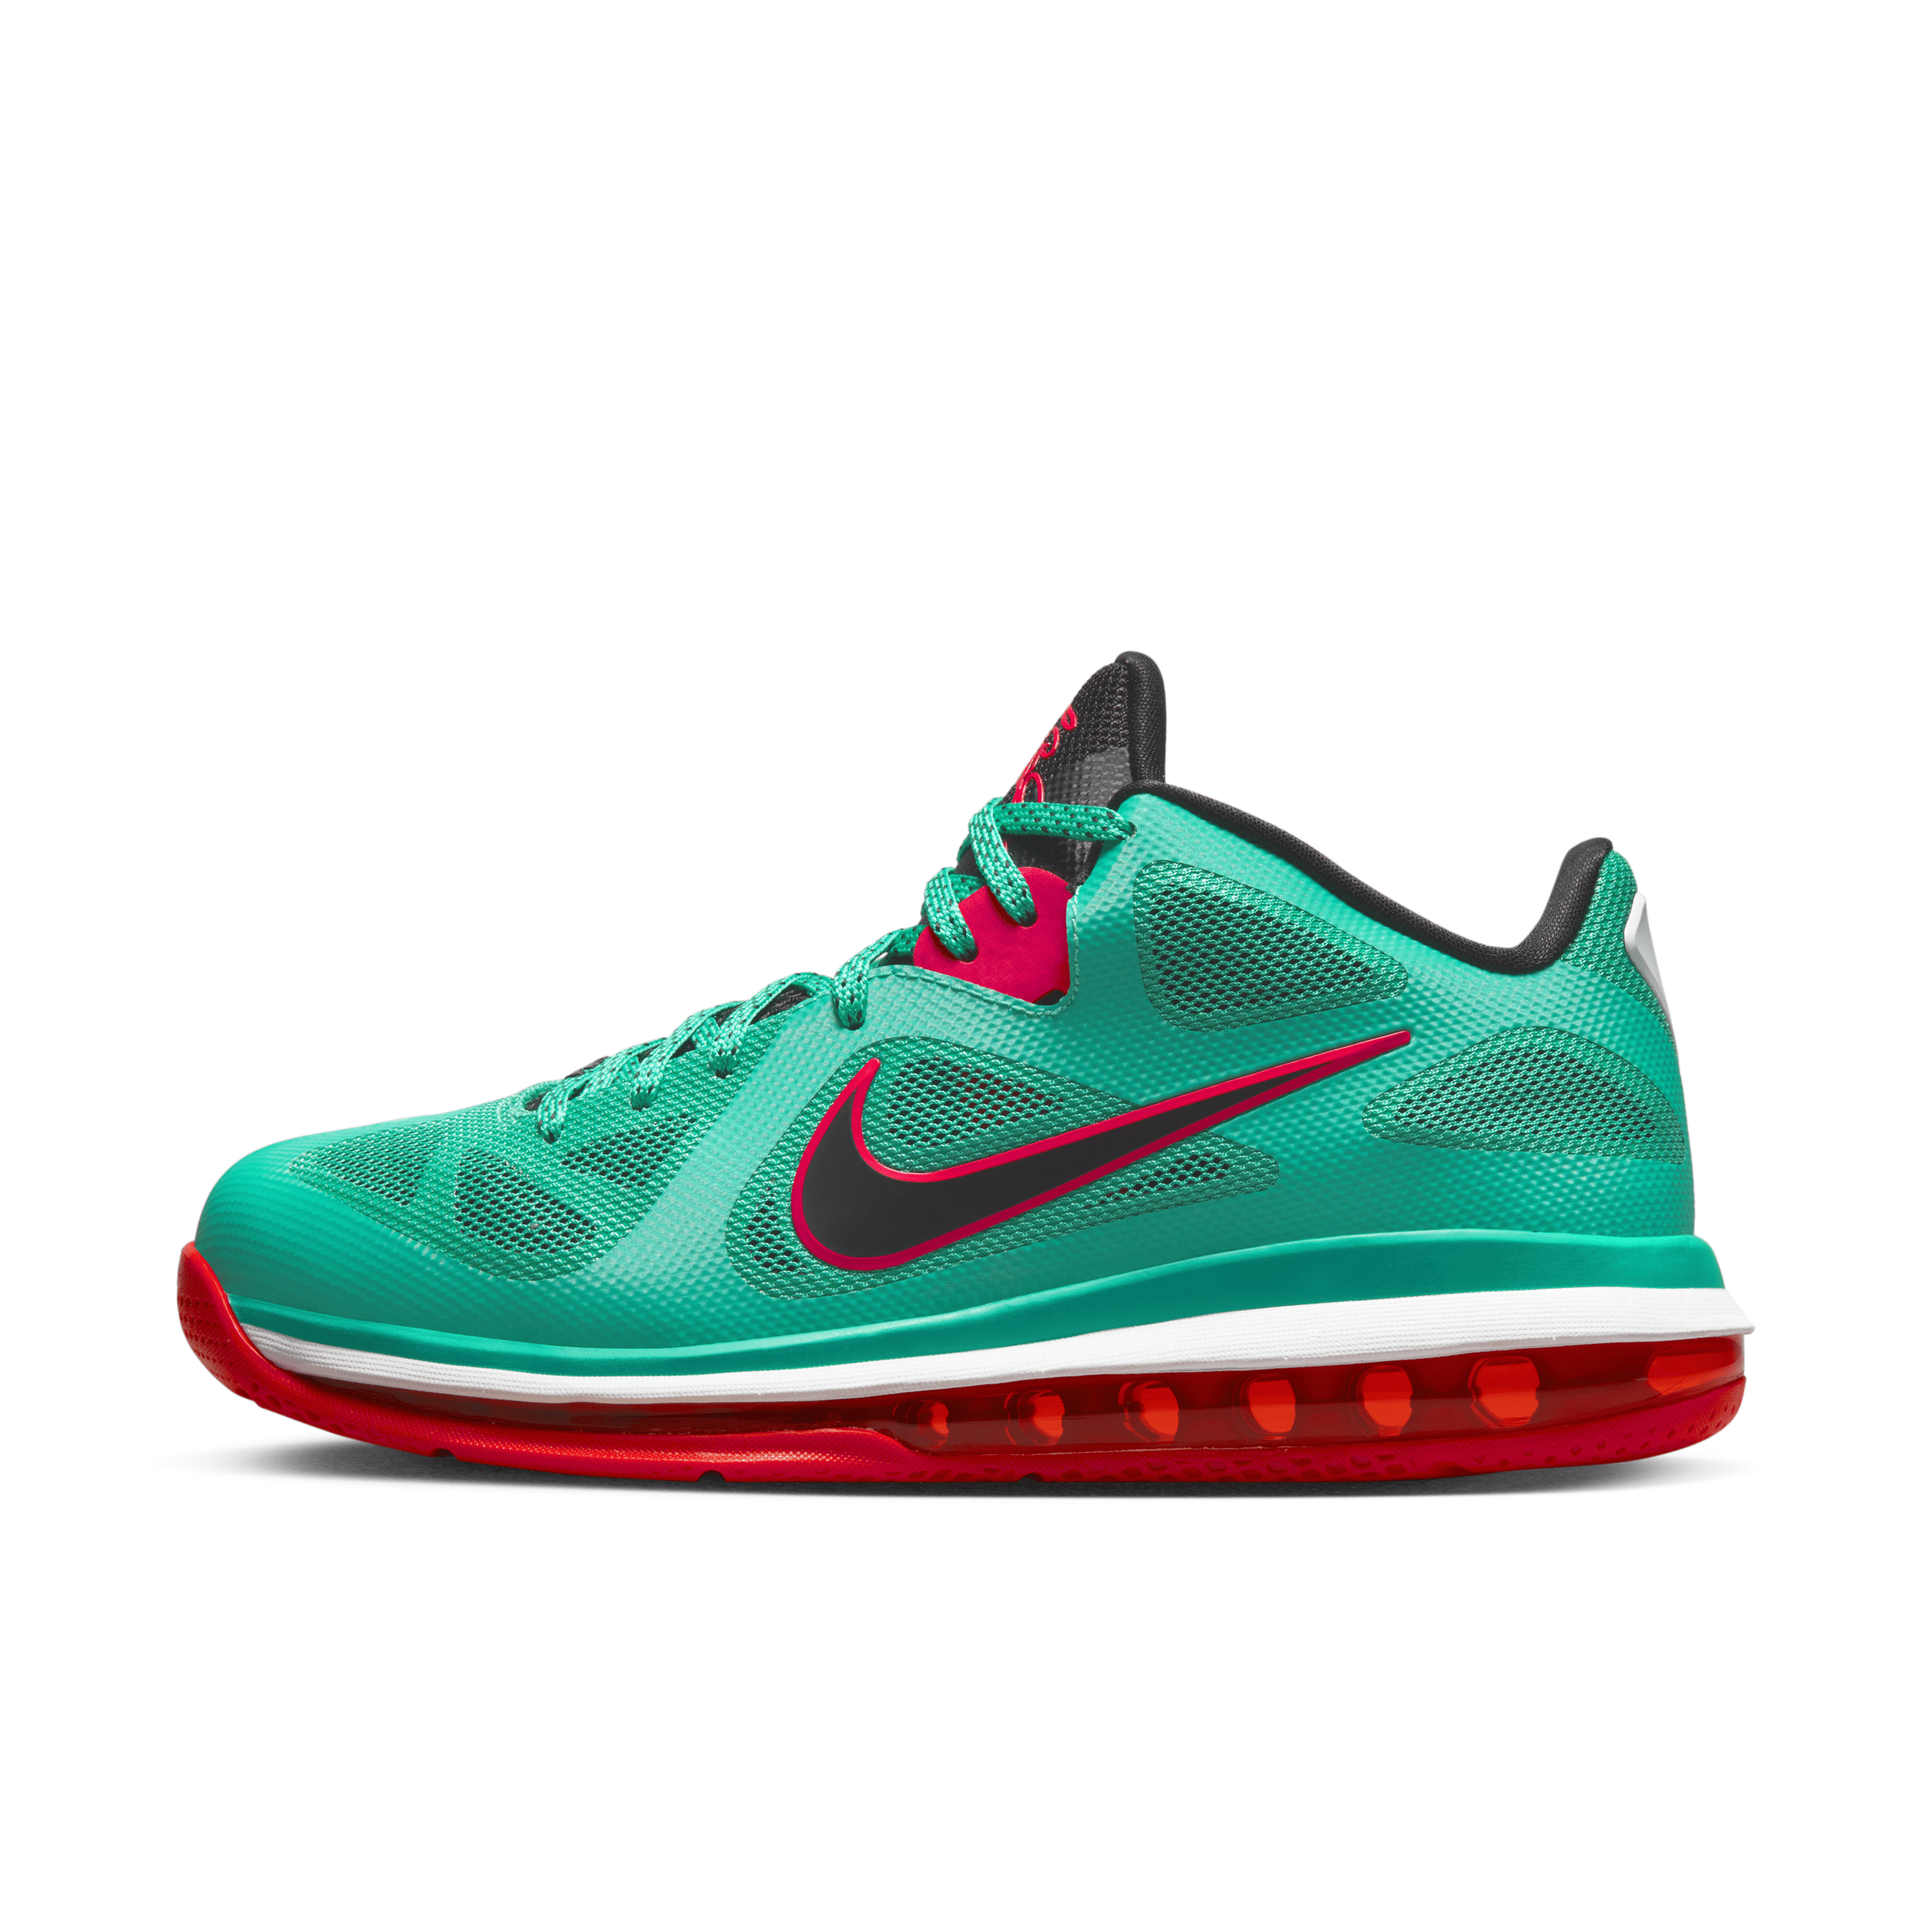 Nike Men's Lebron 9 Low Shoes (New Green/Action Red/White/Black) $115 + Free Shipping